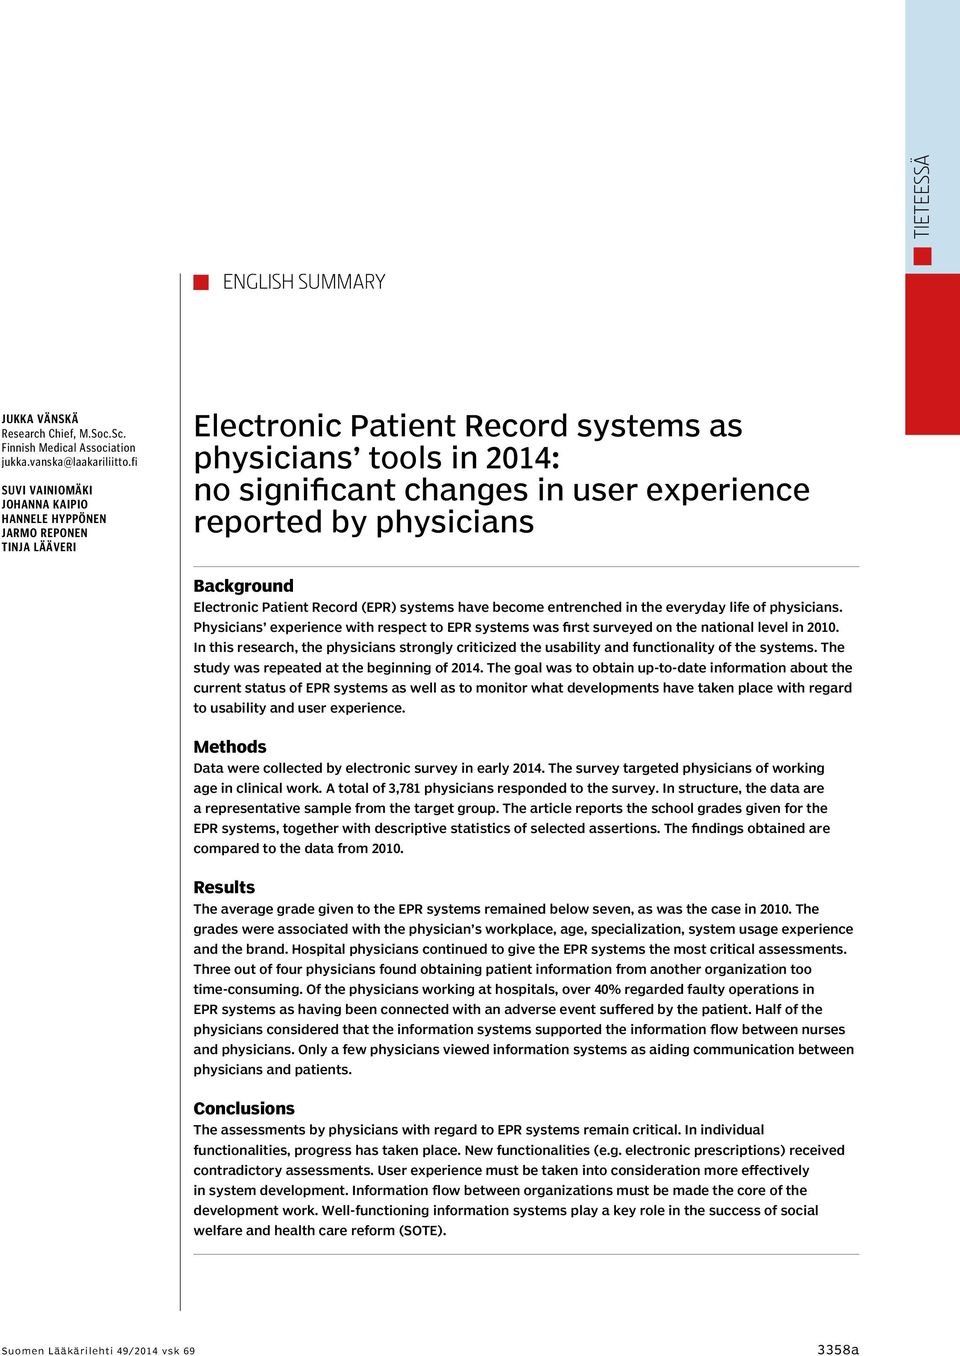 physicians Background Electronic Patient Record (EPR) systems have become entrenched in the everyday life of physicians.